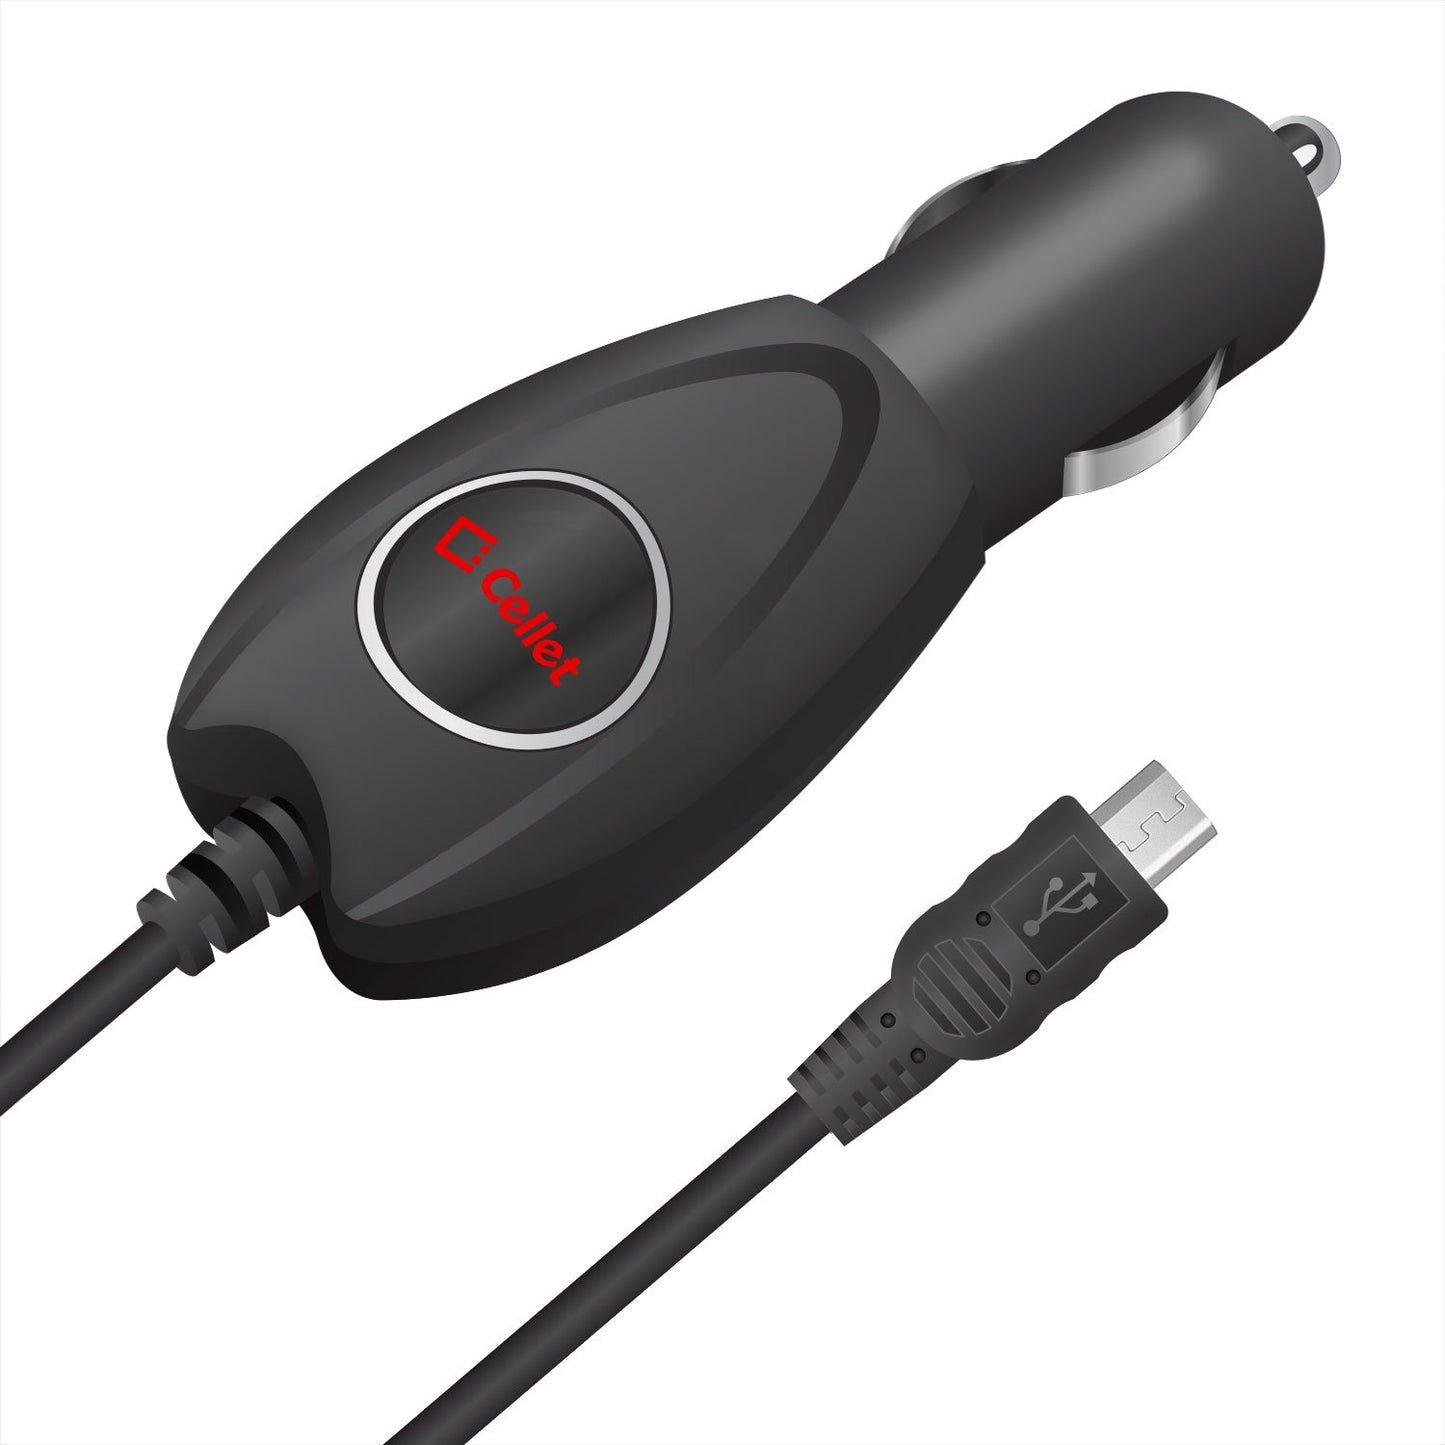 PMICRO1BK - High Powered 5 Watt (1 Amp) Micro USB Coiled Cable (5.7 ft.) Car Charger by Cellet - Black